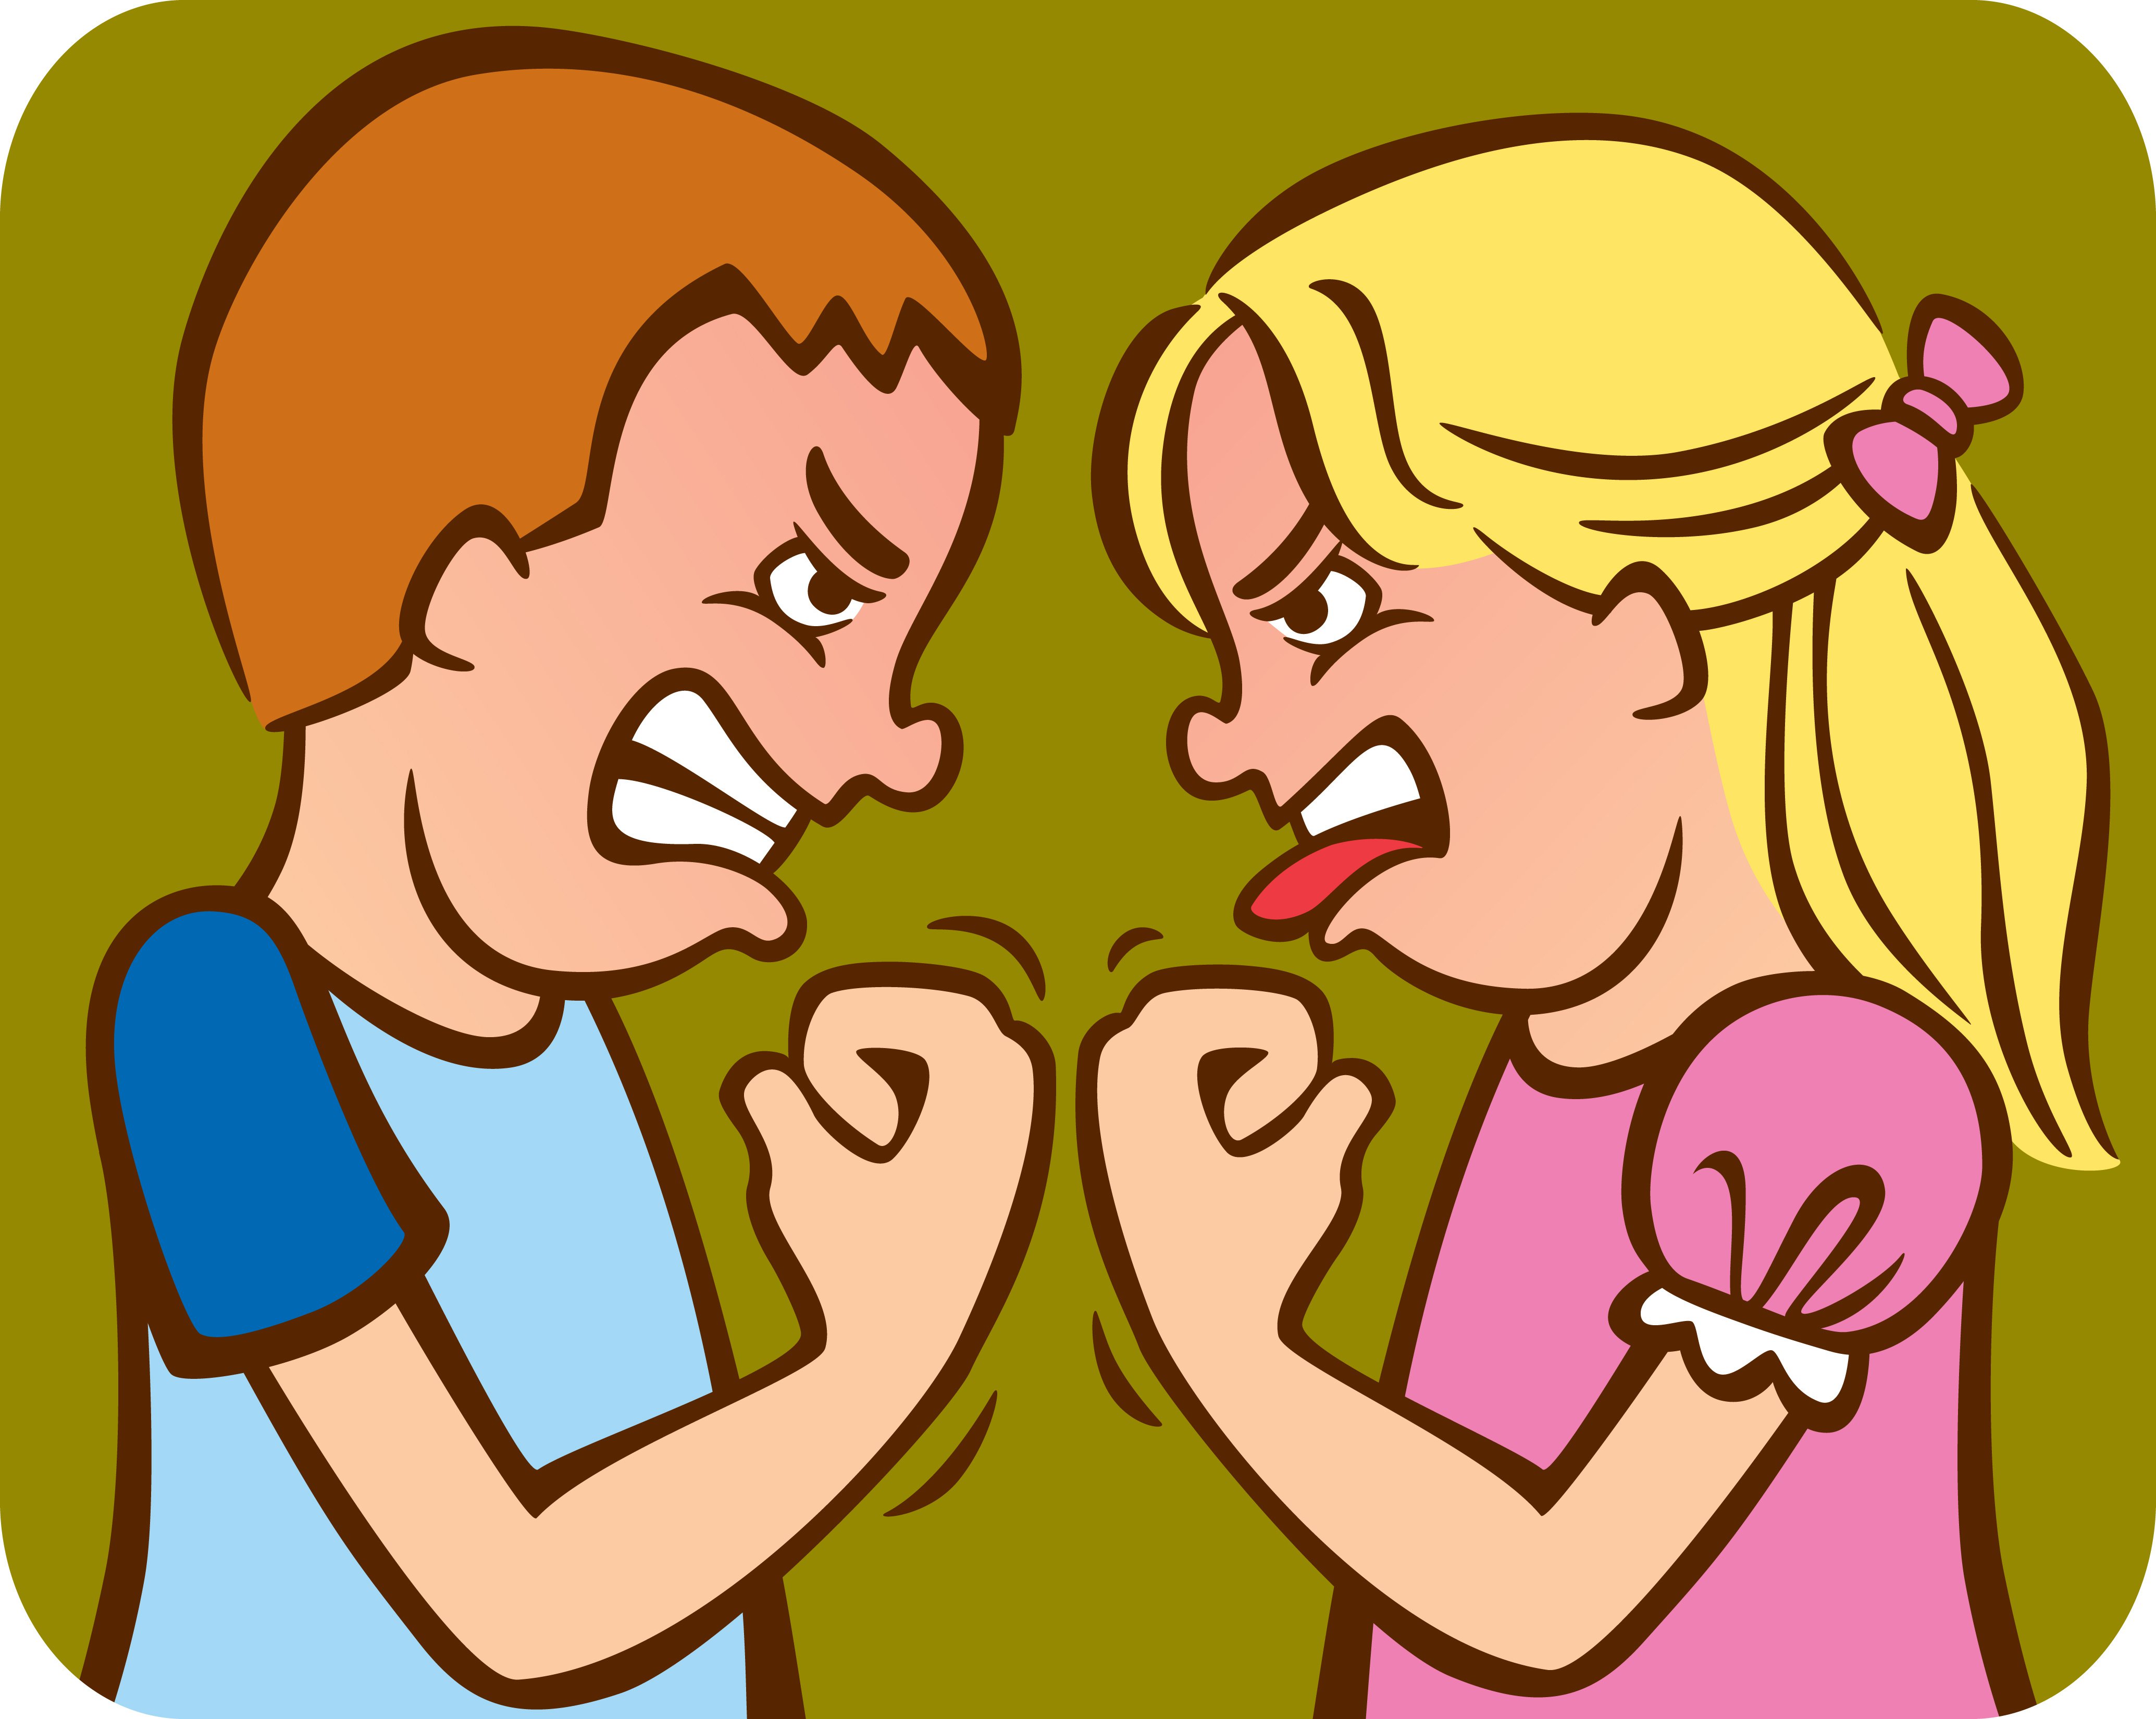 Fighting clipart bellicose. Free cartoon cliparts download